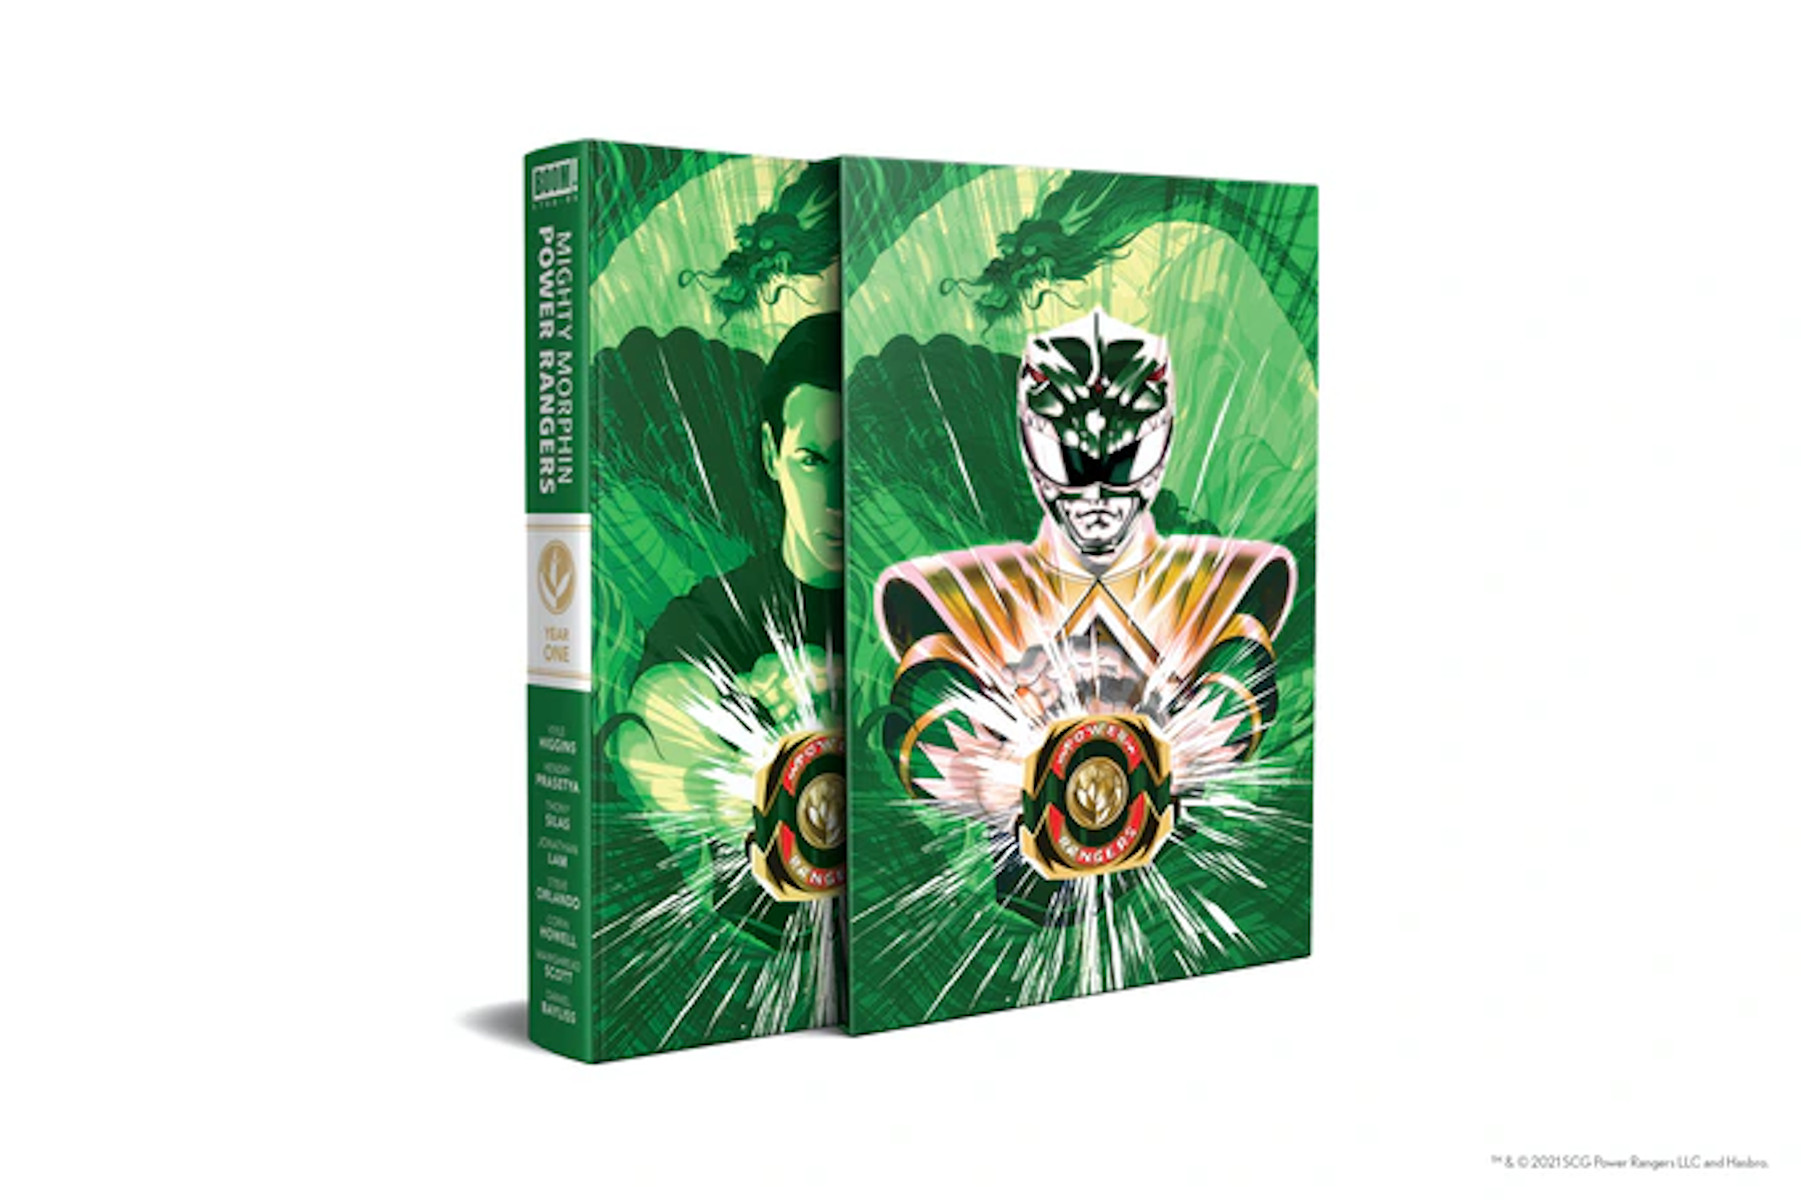 Morphin Edition (Art by Goñi Montes)